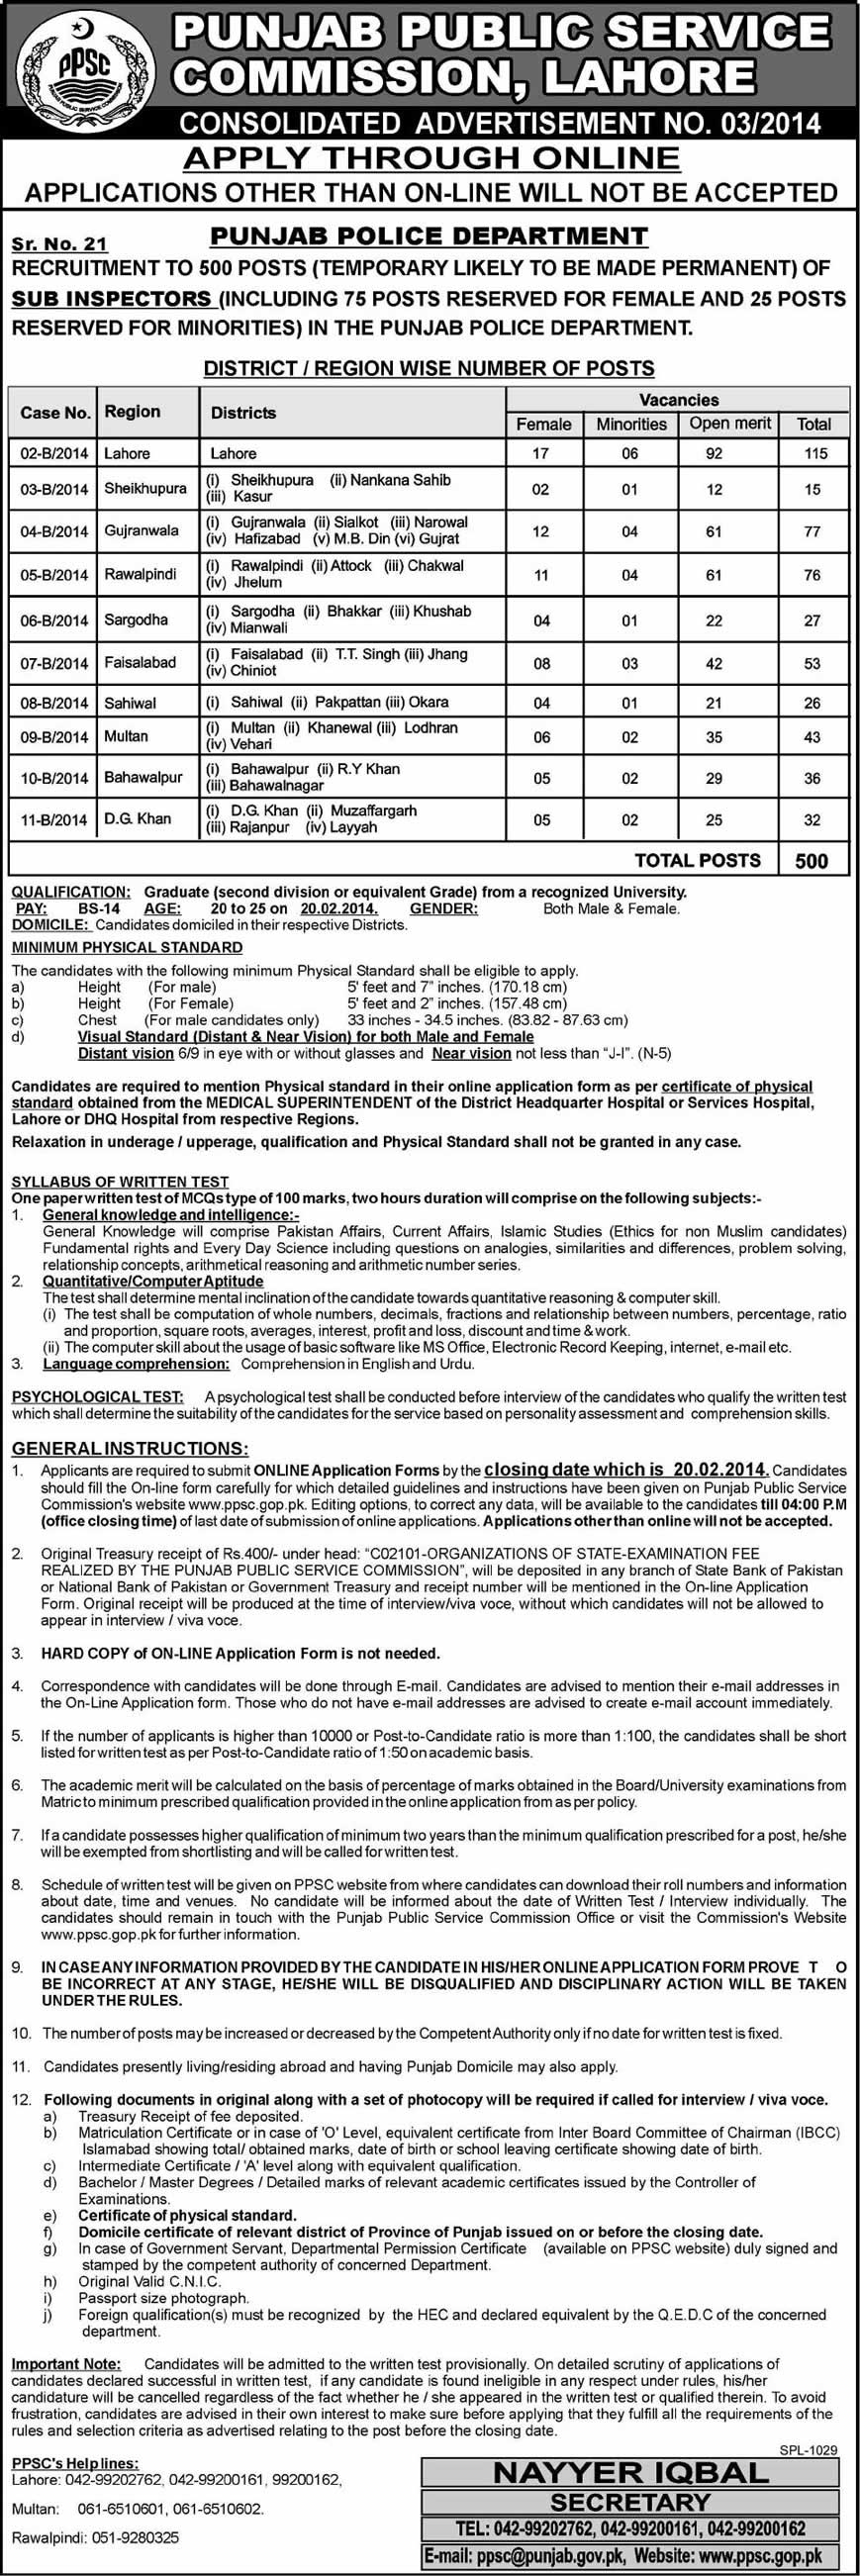 PPSC Jobs 2014 Latest for Sub Inspectors in Punjab Police